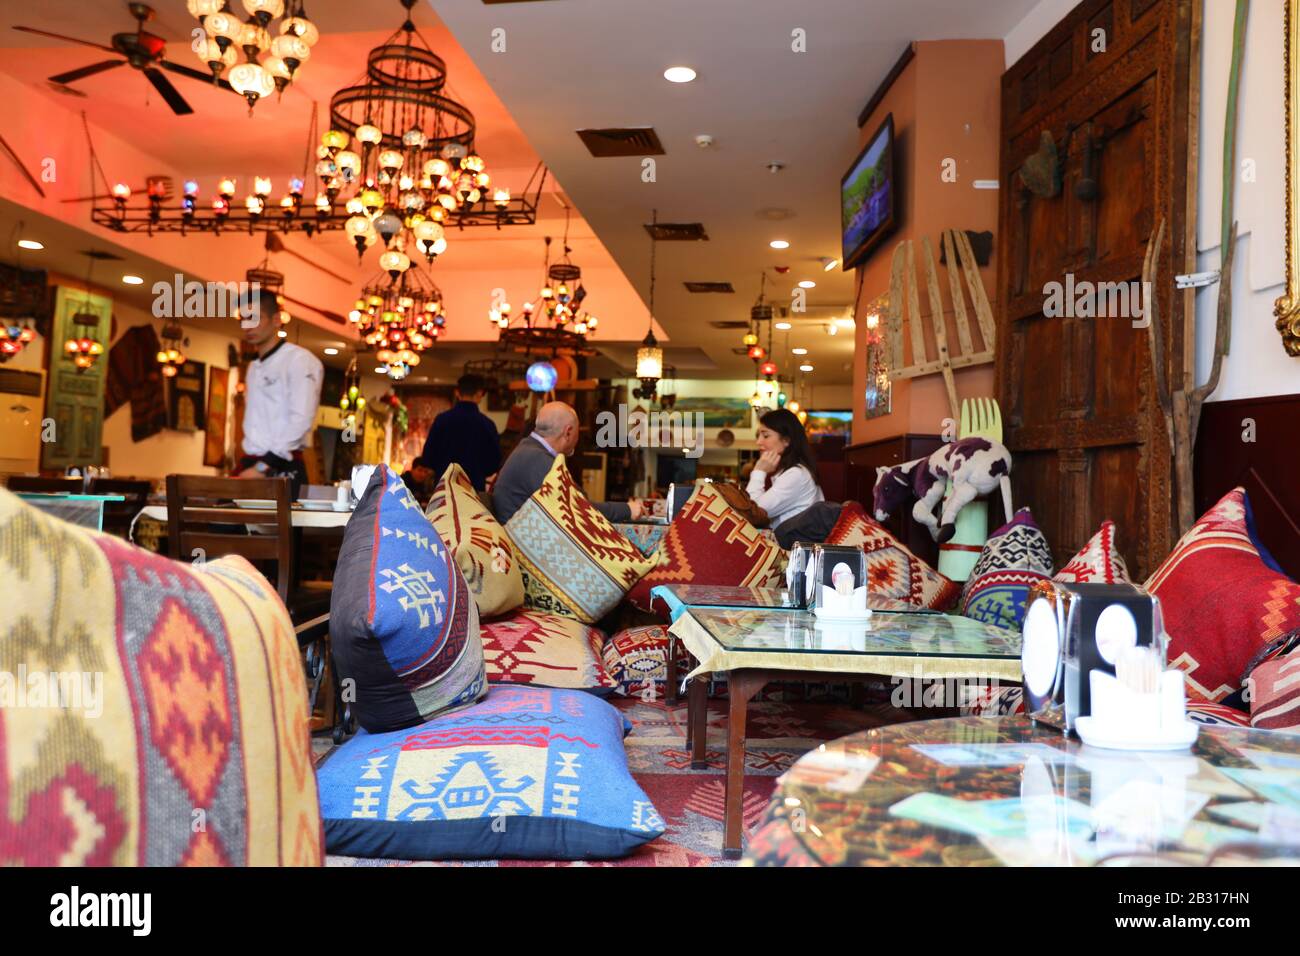 Interior of a cafe in the old city for tourists. Cafe Serving, interior, visitors. Istanbul Stock Photo